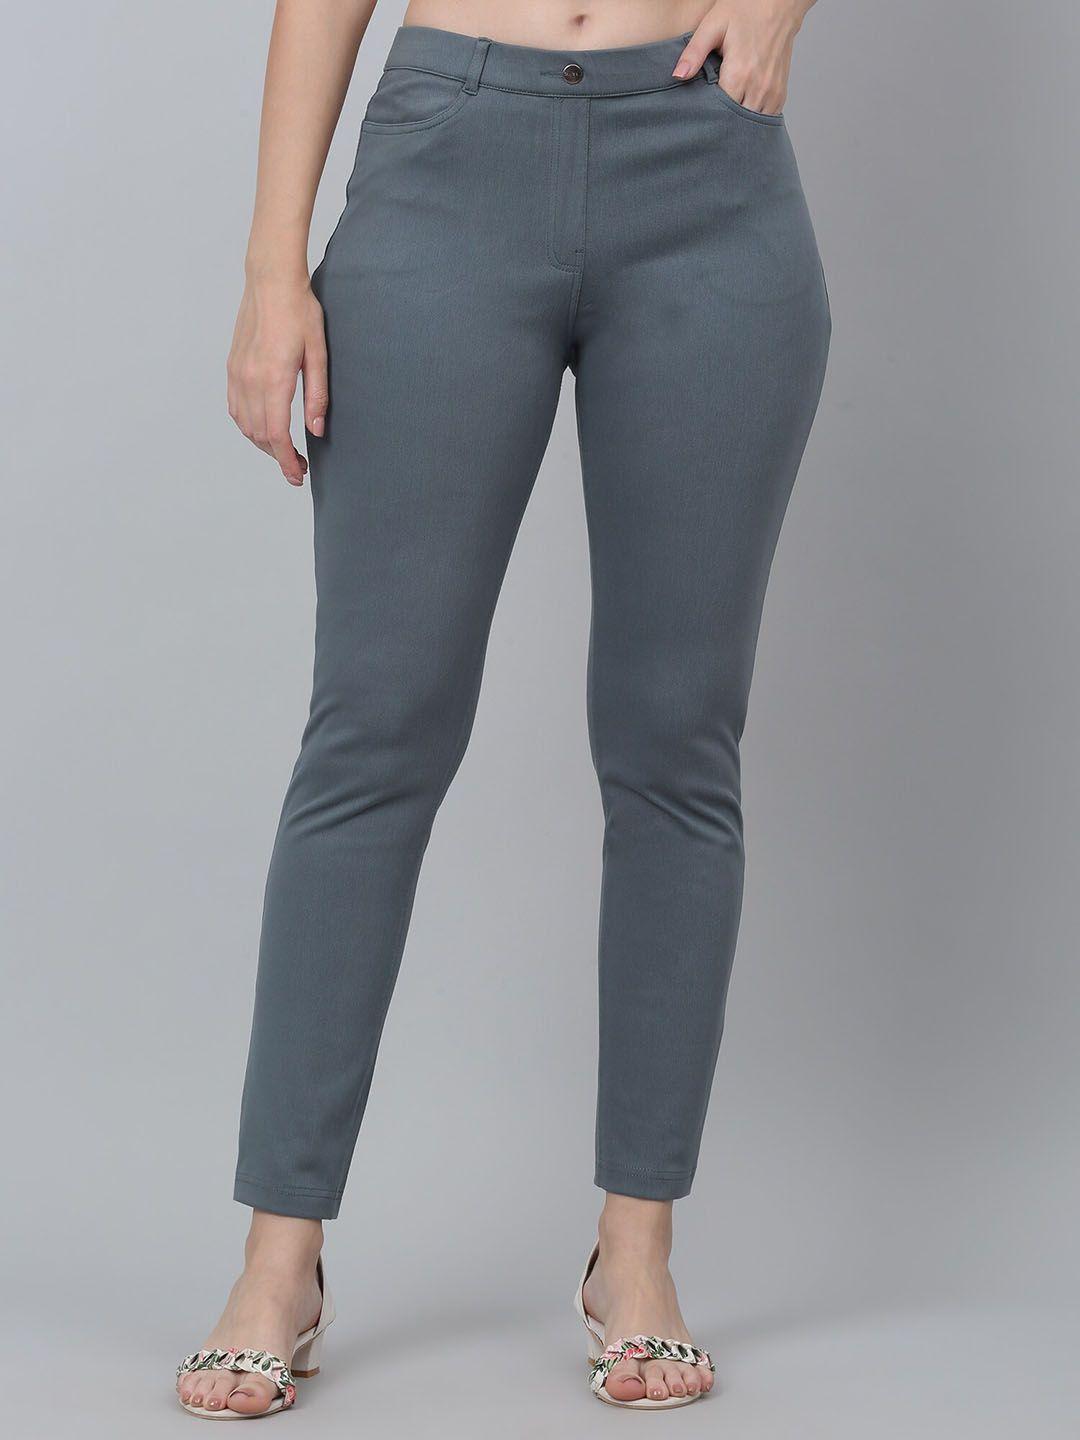 Cantabil Cotton Mid Rise Regular Fit Jeggings